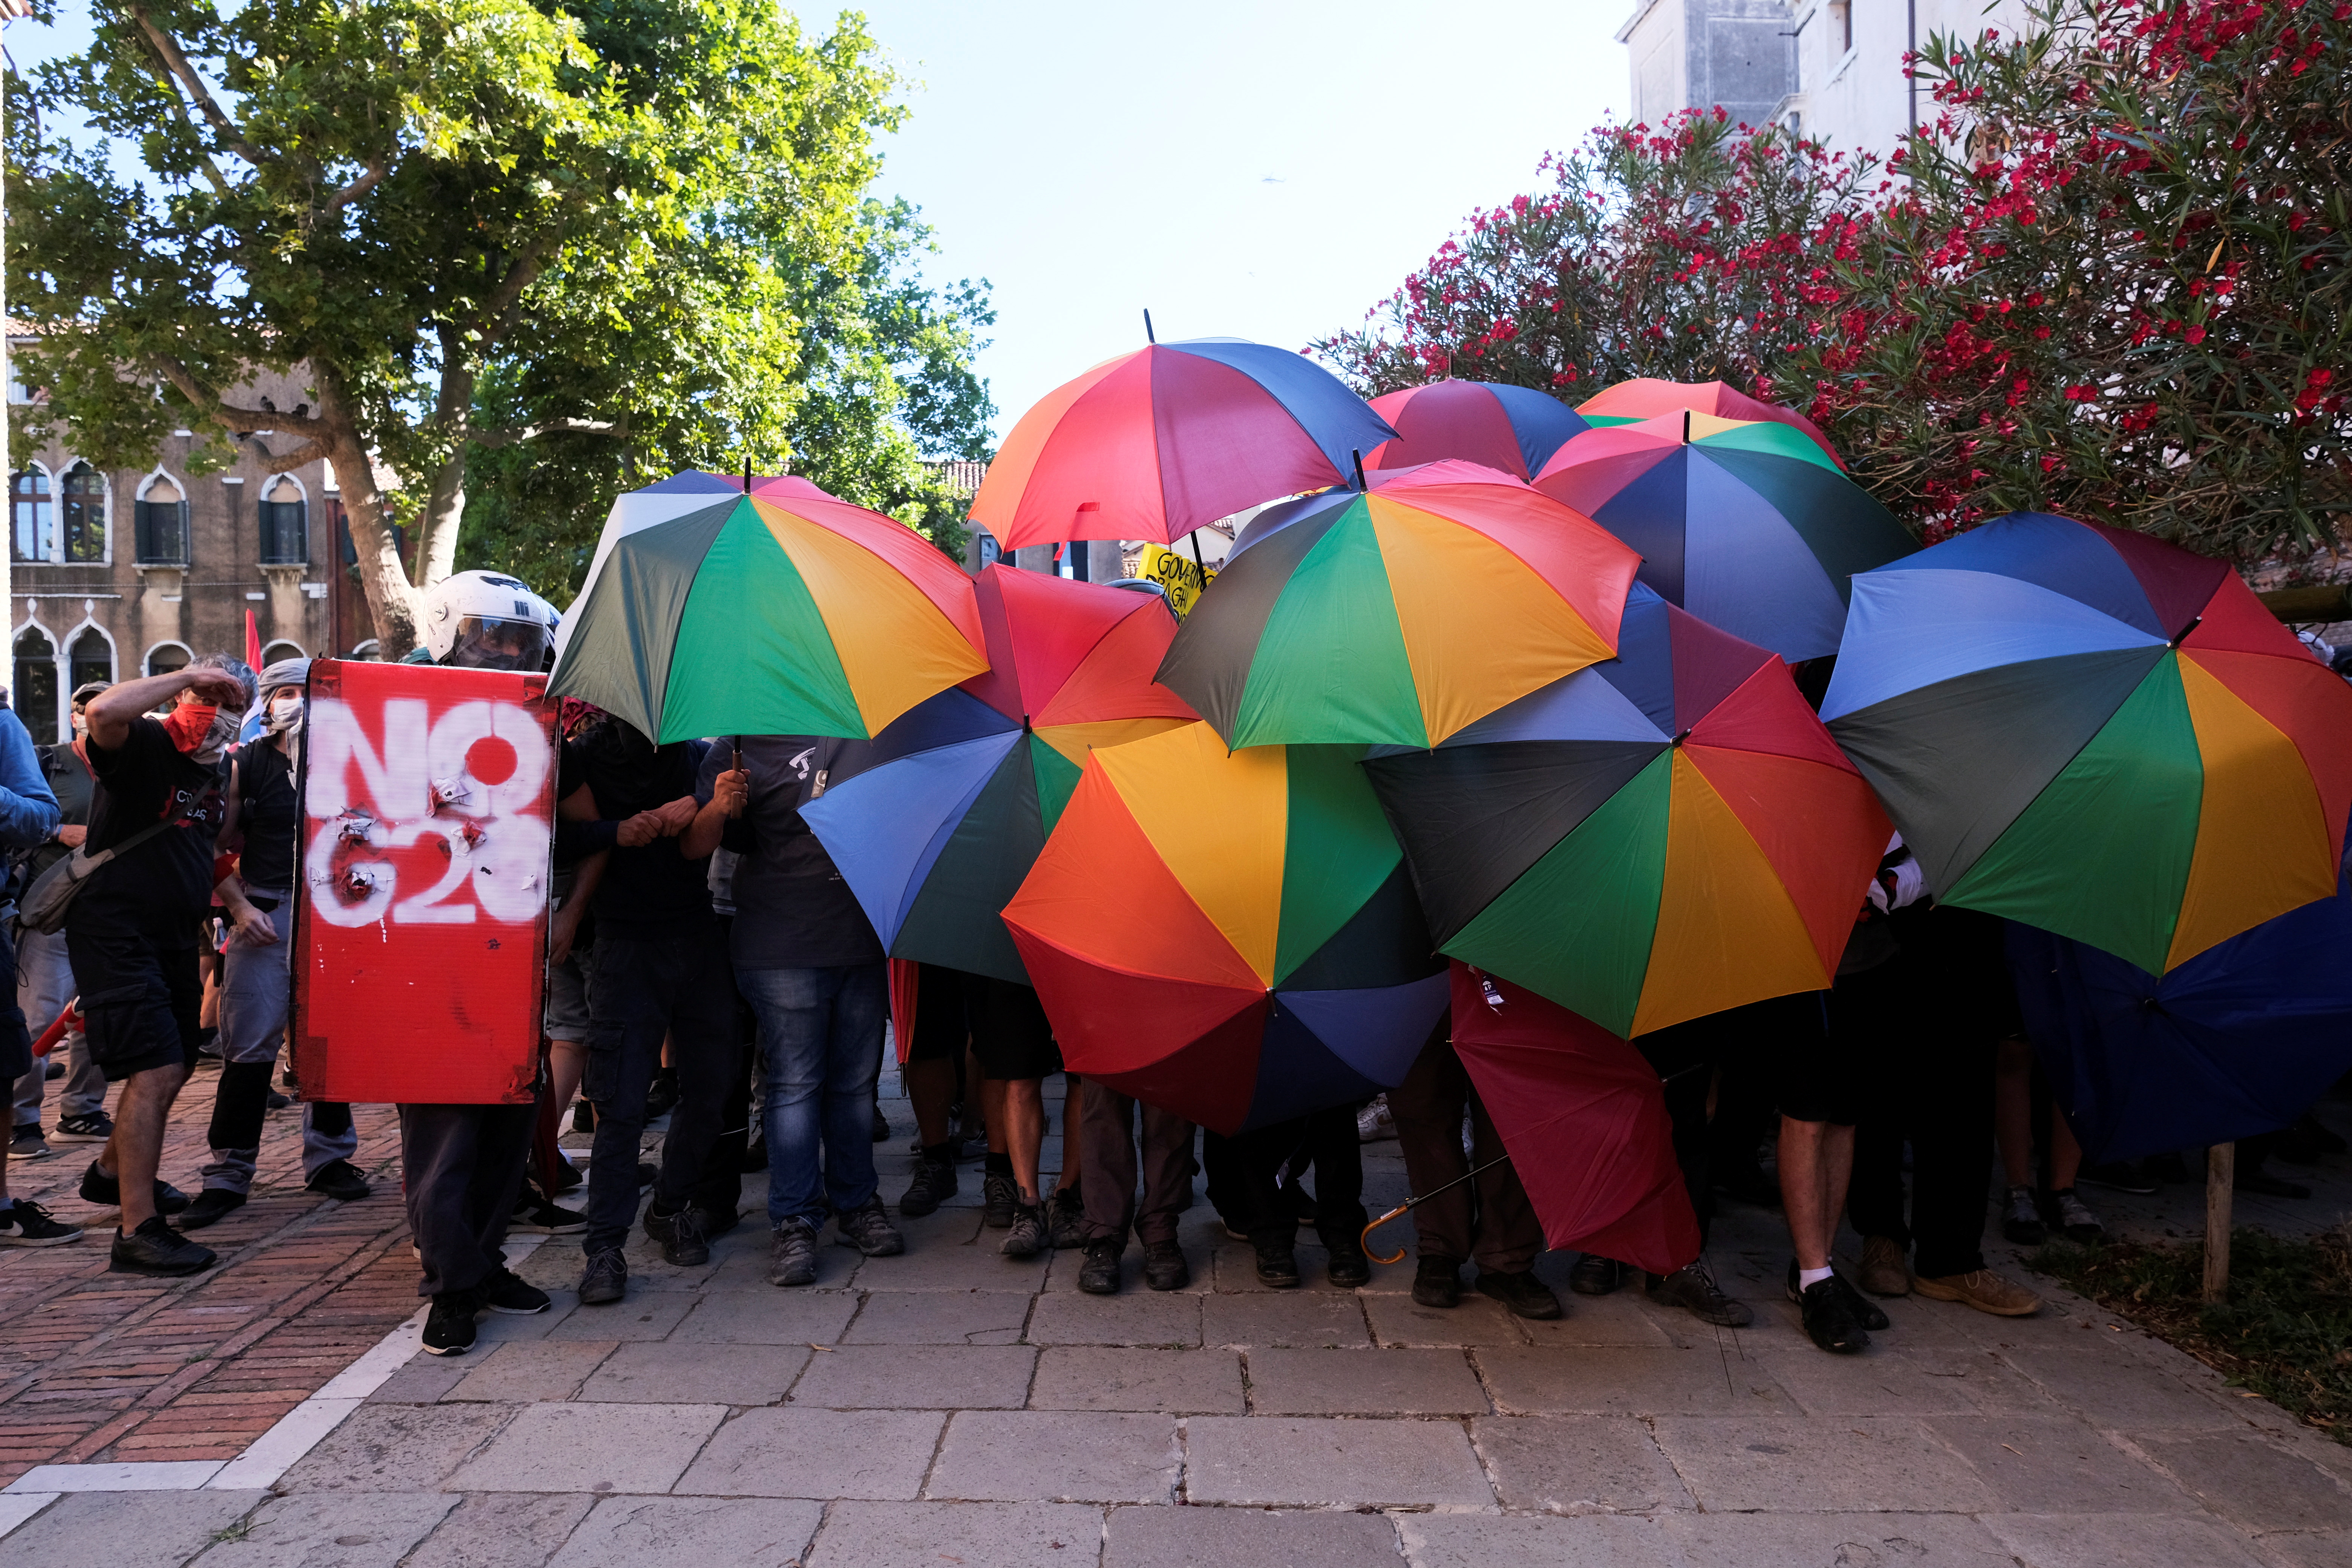 Protesters hold rainbow umbrellas as they demonstrate against finance ministers from G20 countries and their policies as they meet in Venice, in Venice, Italy, July 10, 2021. REUTERS/Manuel Silvestri